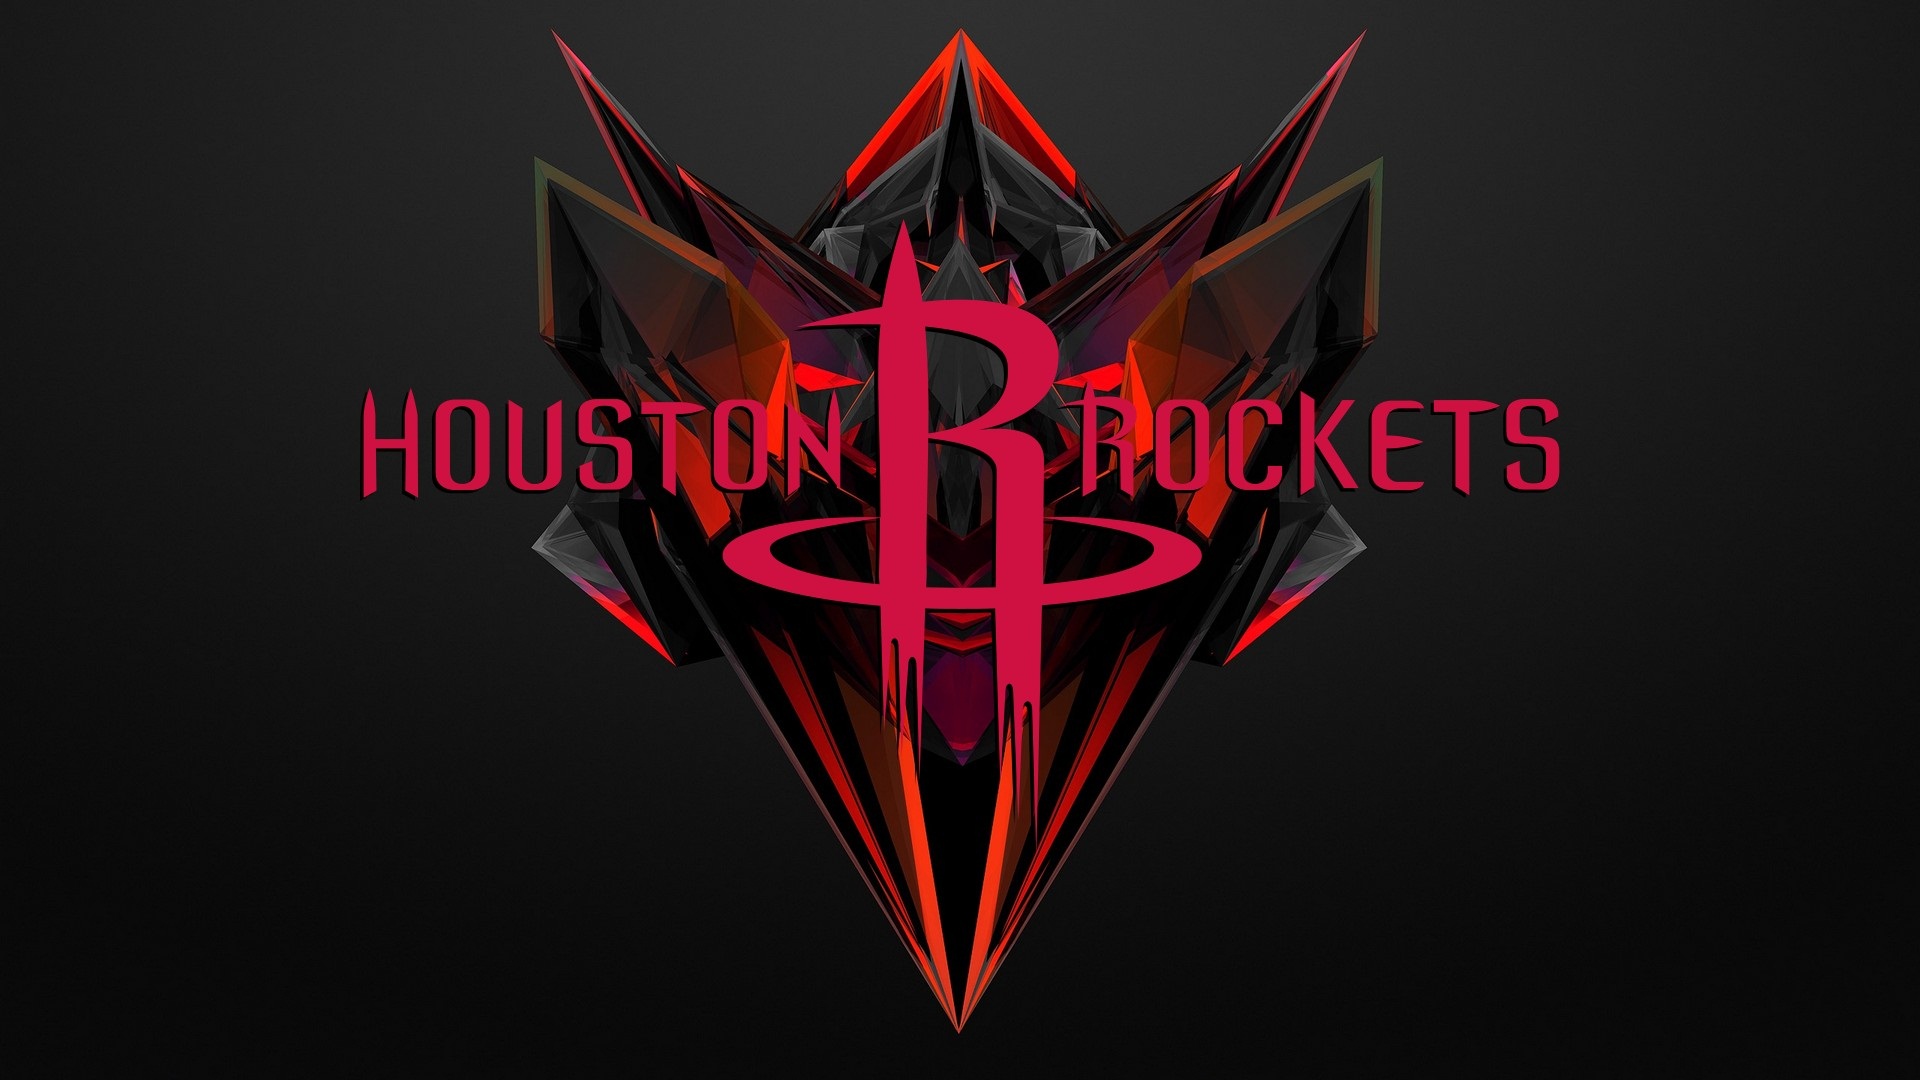 Wallpapers Houston Basketball with image dimensions 1920x1080 pixel. You can make this wallpaper for your Desktop Computer Backgrounds, Windows or Mac Screensavers, iPhone Lock screen, Tablet or Android and another Mobile Phone device